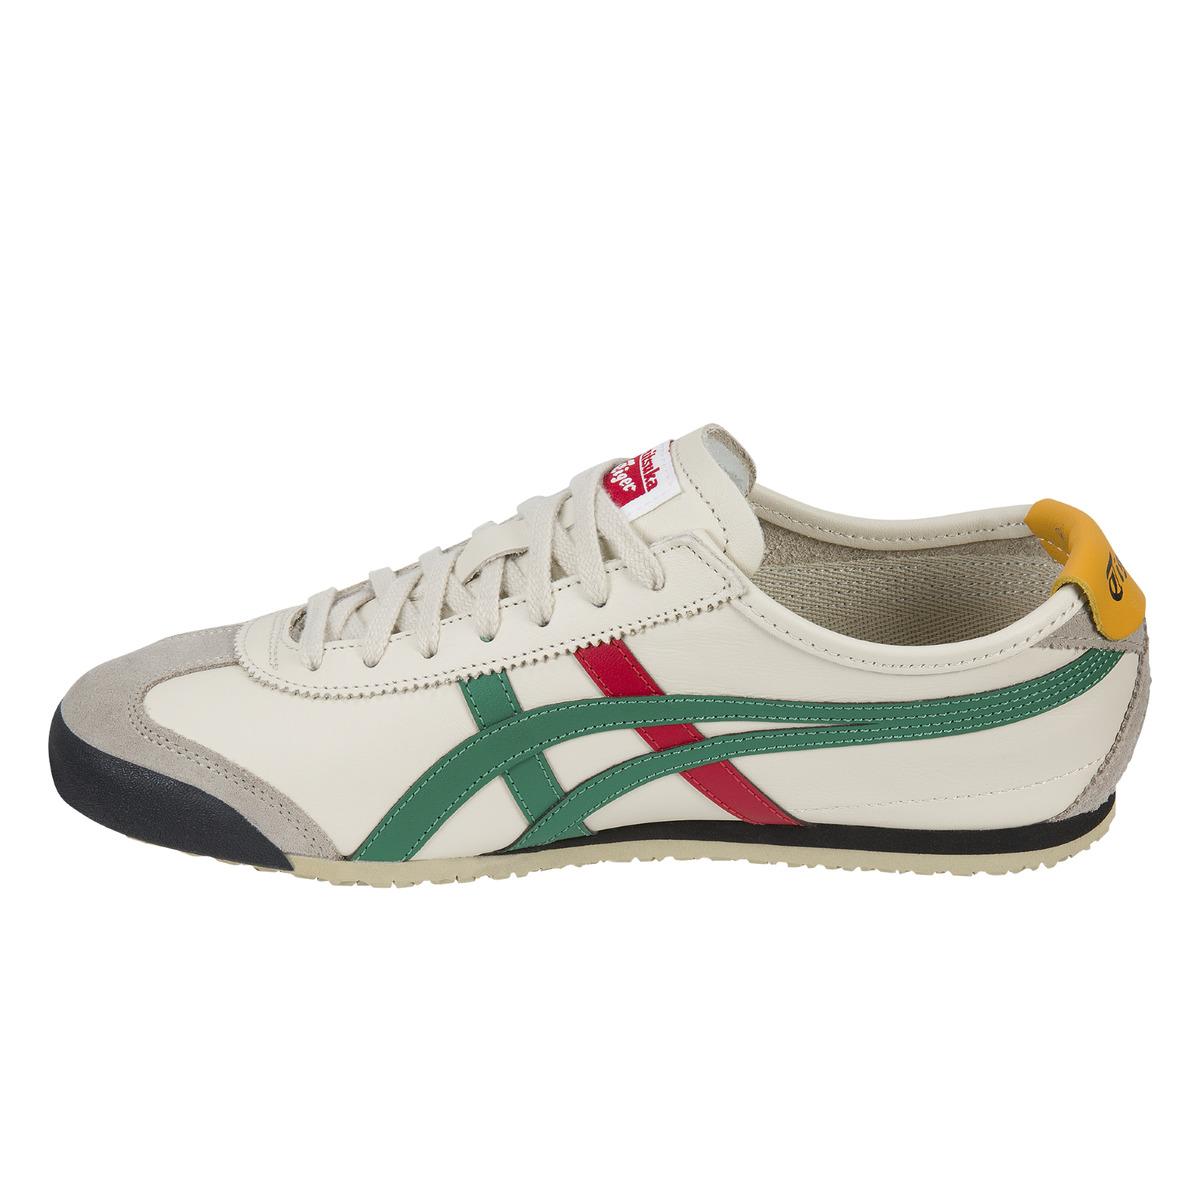 Asics Leather Onitsuka Tiger Mexico 66 Casual Trainers in White / Green ...